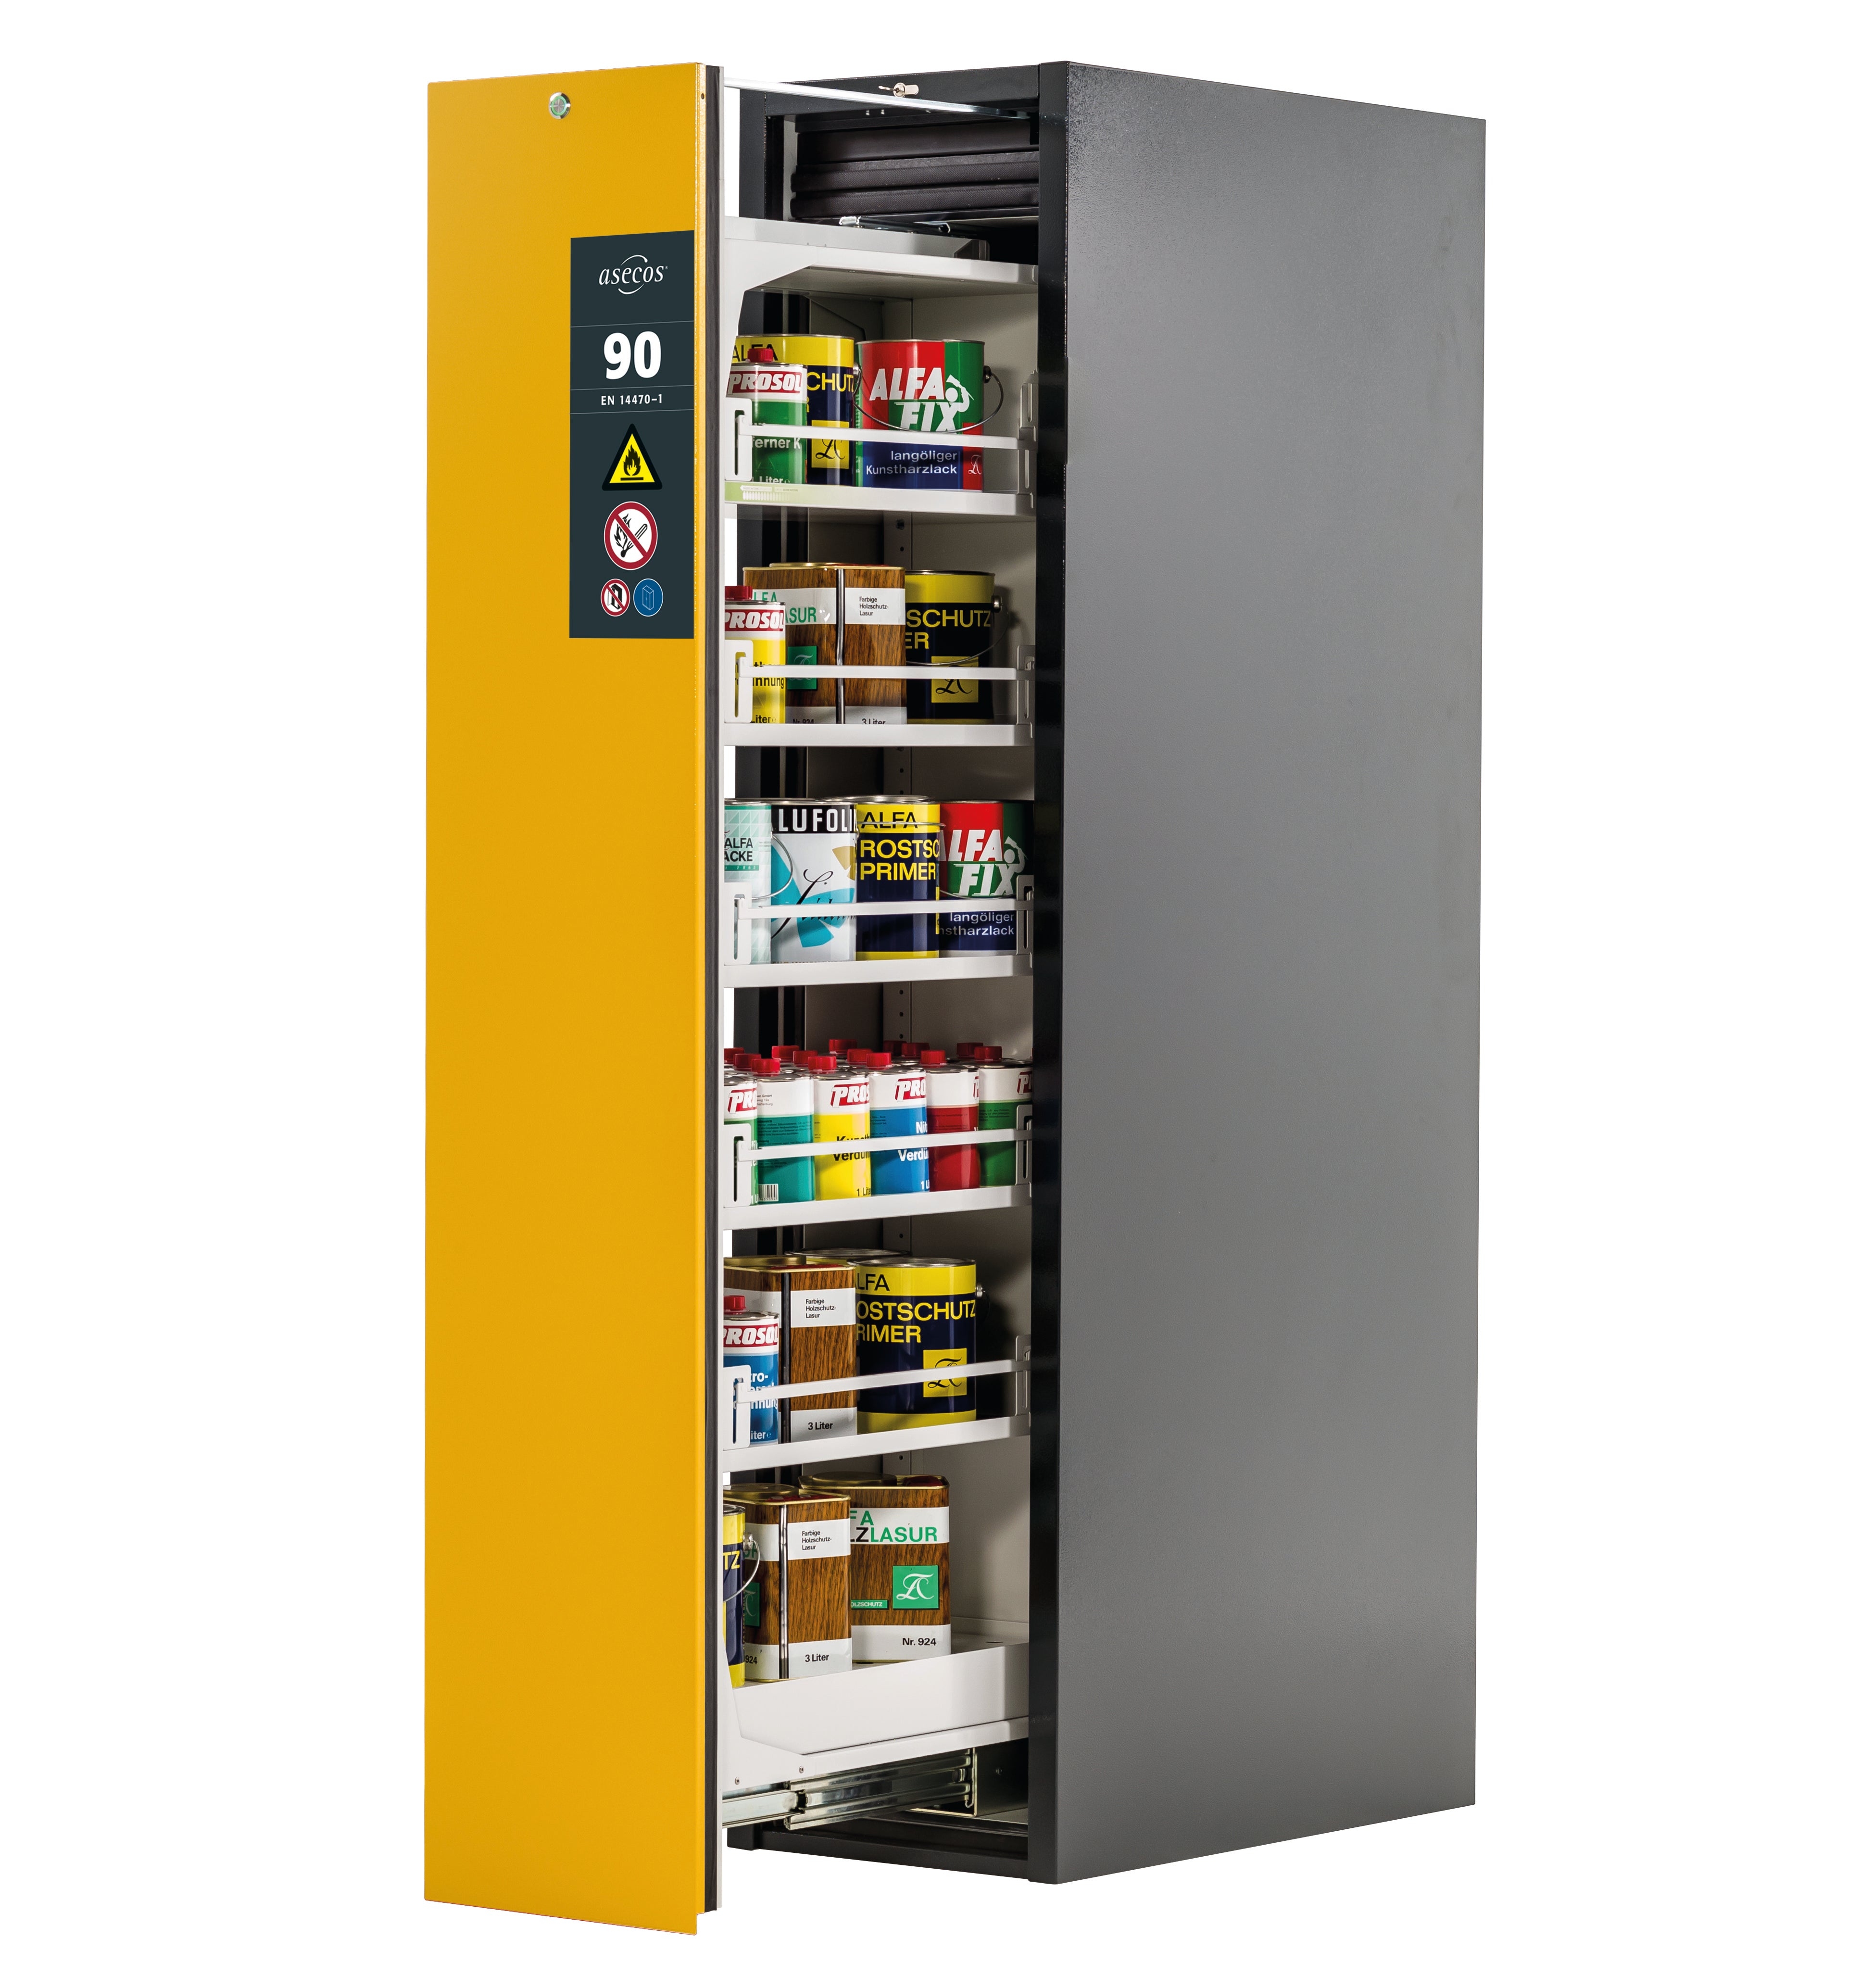 Type 90 safety cabinet V-MOVE-90 model V90.196.045.VDAC:0013 in safety yellow RAL 1004 with 5x standard shelves (sheet steel)